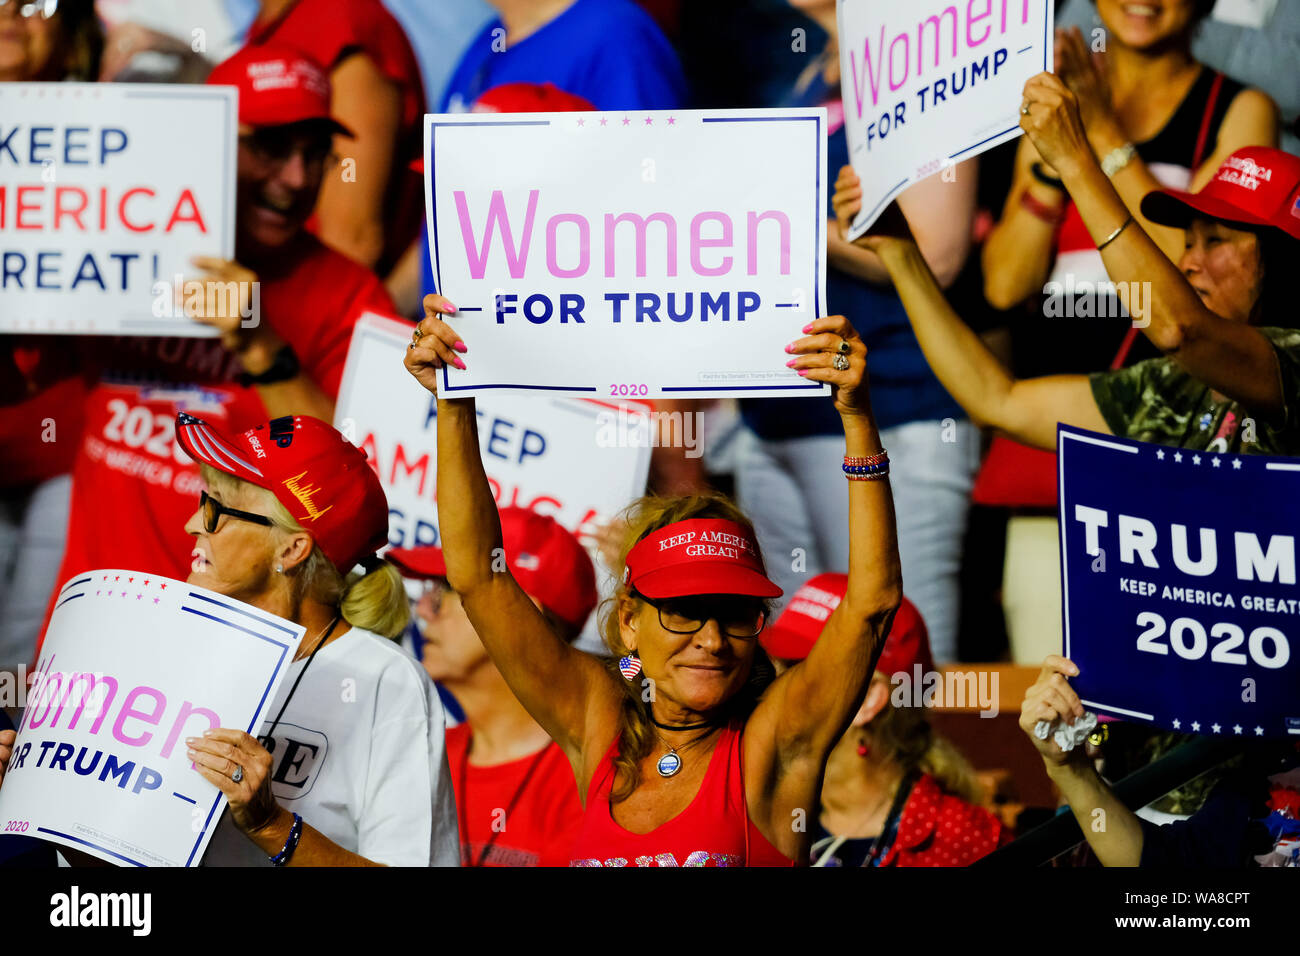 Women For Trump show their support during the MAGA Rally in New Hampshire. Stock Photo